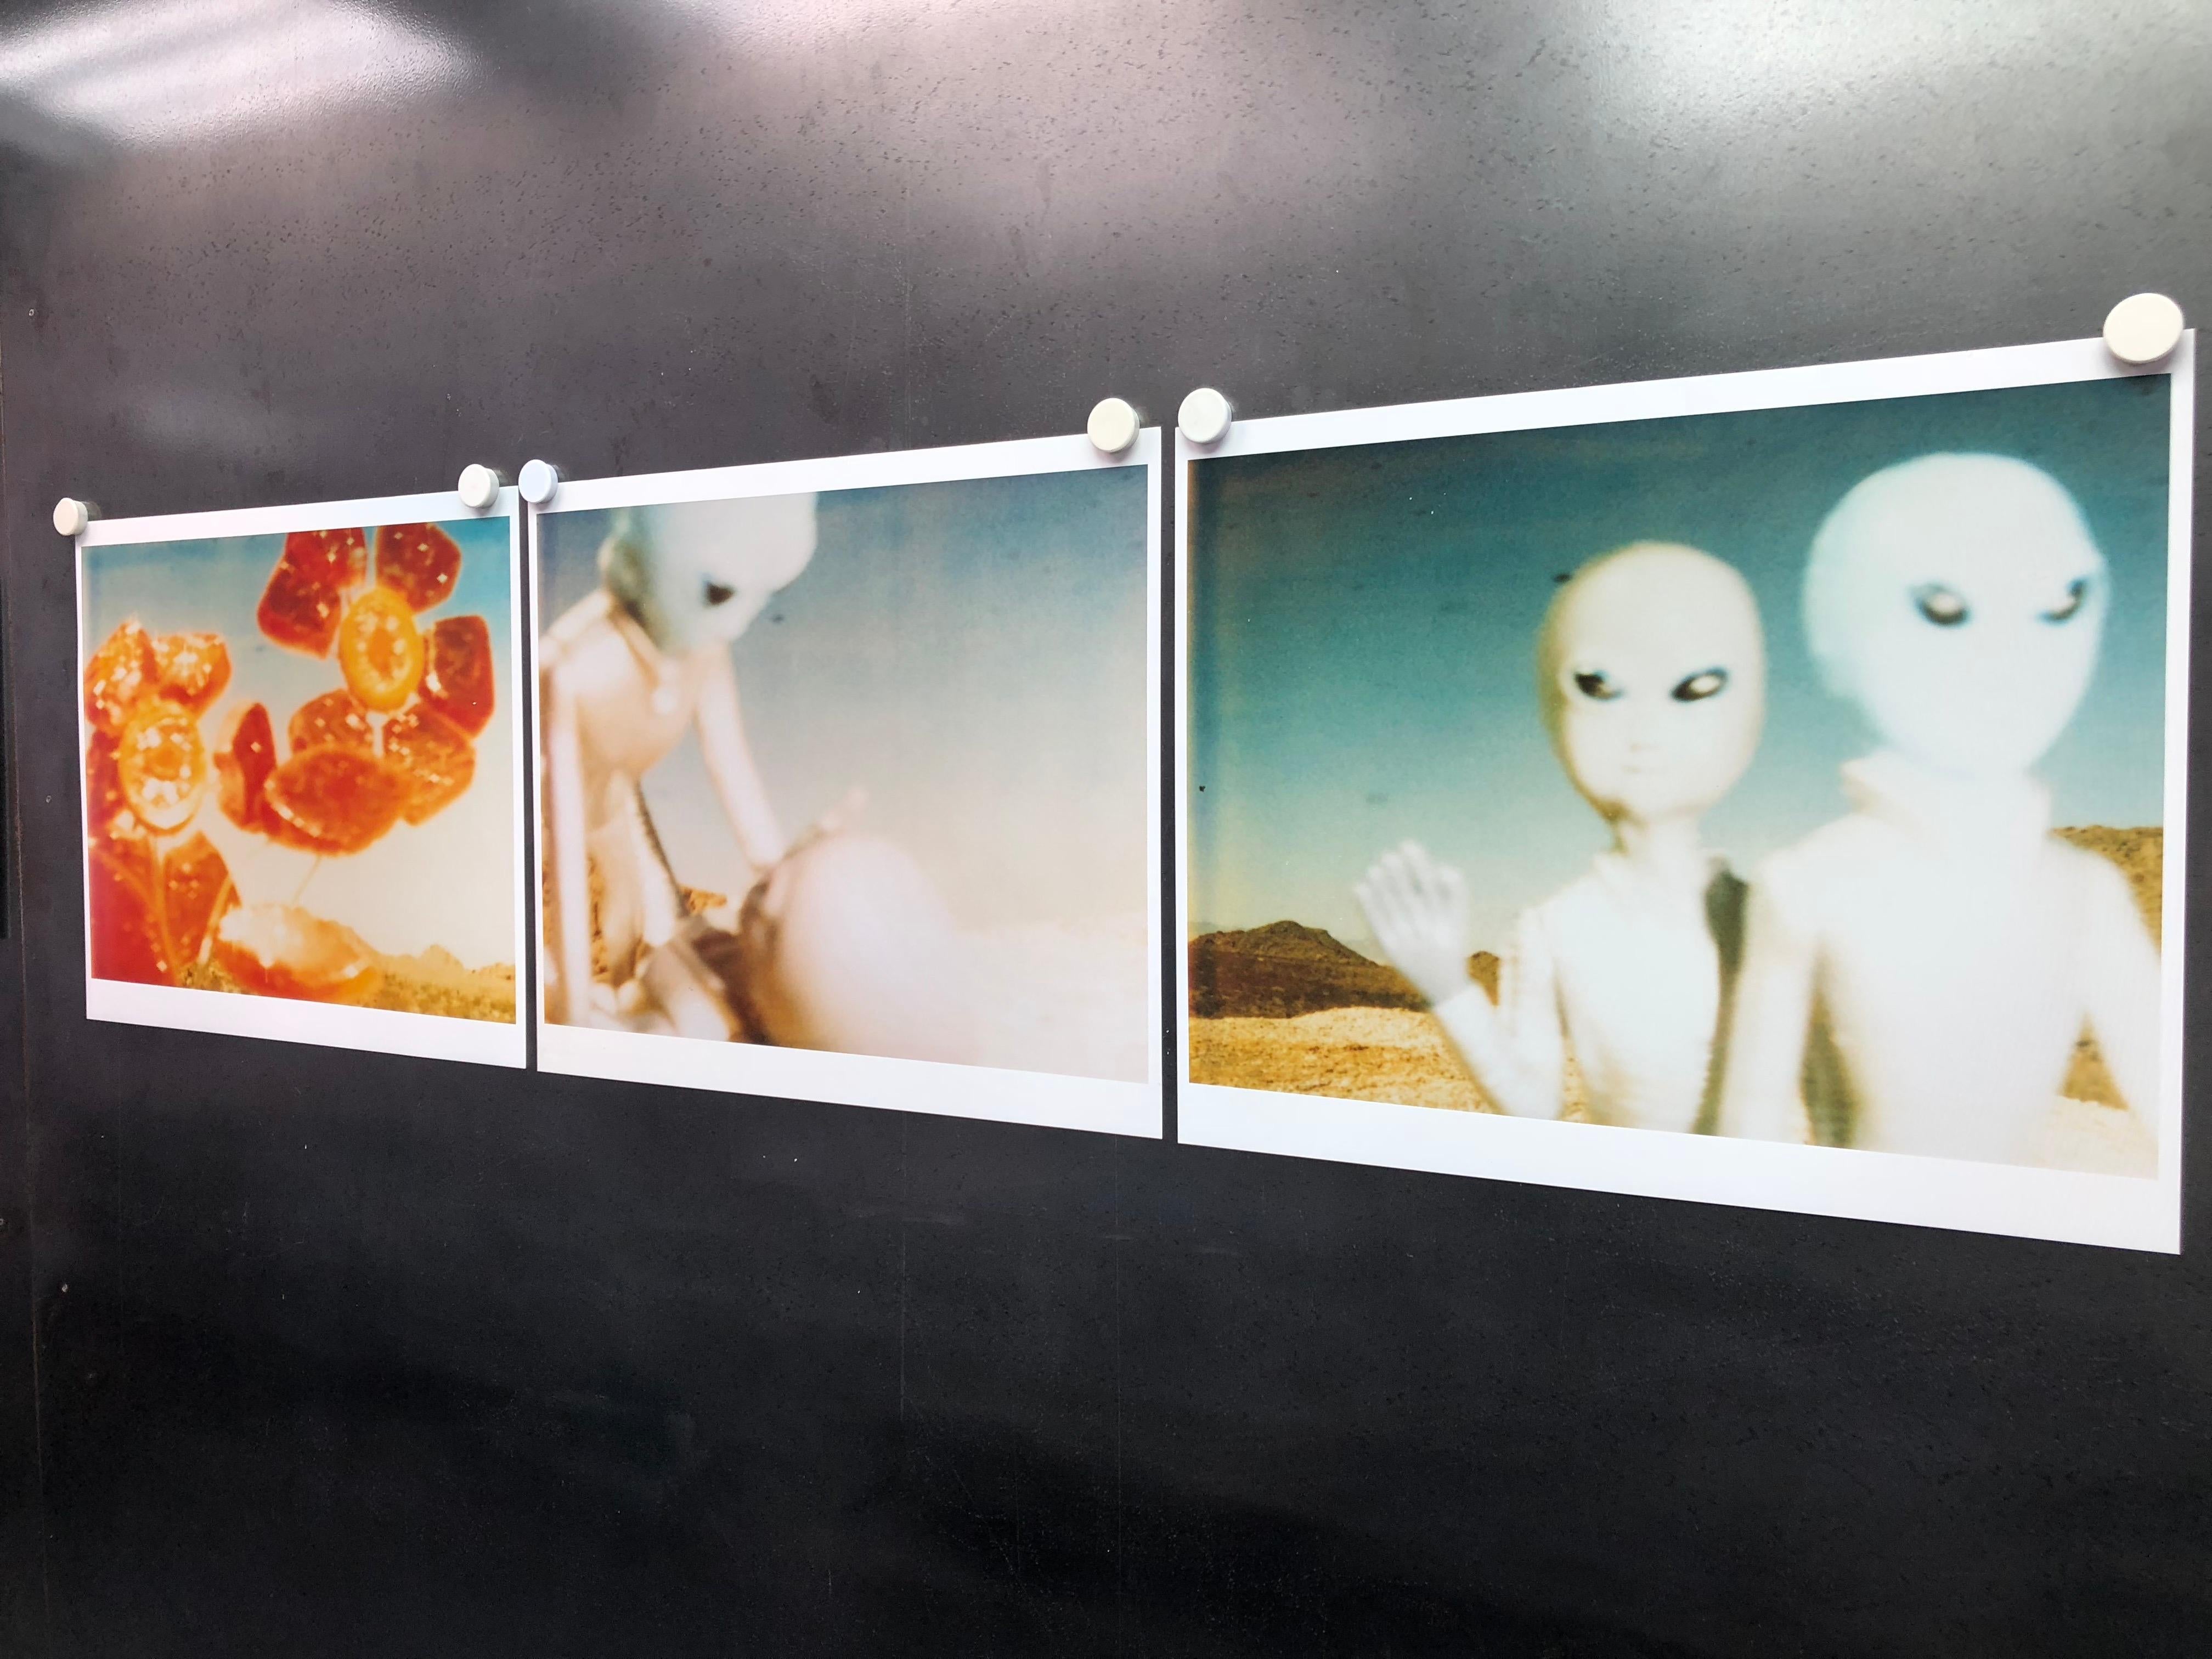 Aliens, triptych, 1998, Edition 2/5, 48x59cm each, 48x190 installed including the gaps.
analog C-Print, hand-printed by the artist on Fuji Crystal Achive Paper, matte finish, 
based on a Polaroid, Certificate and signature label
artist inventory